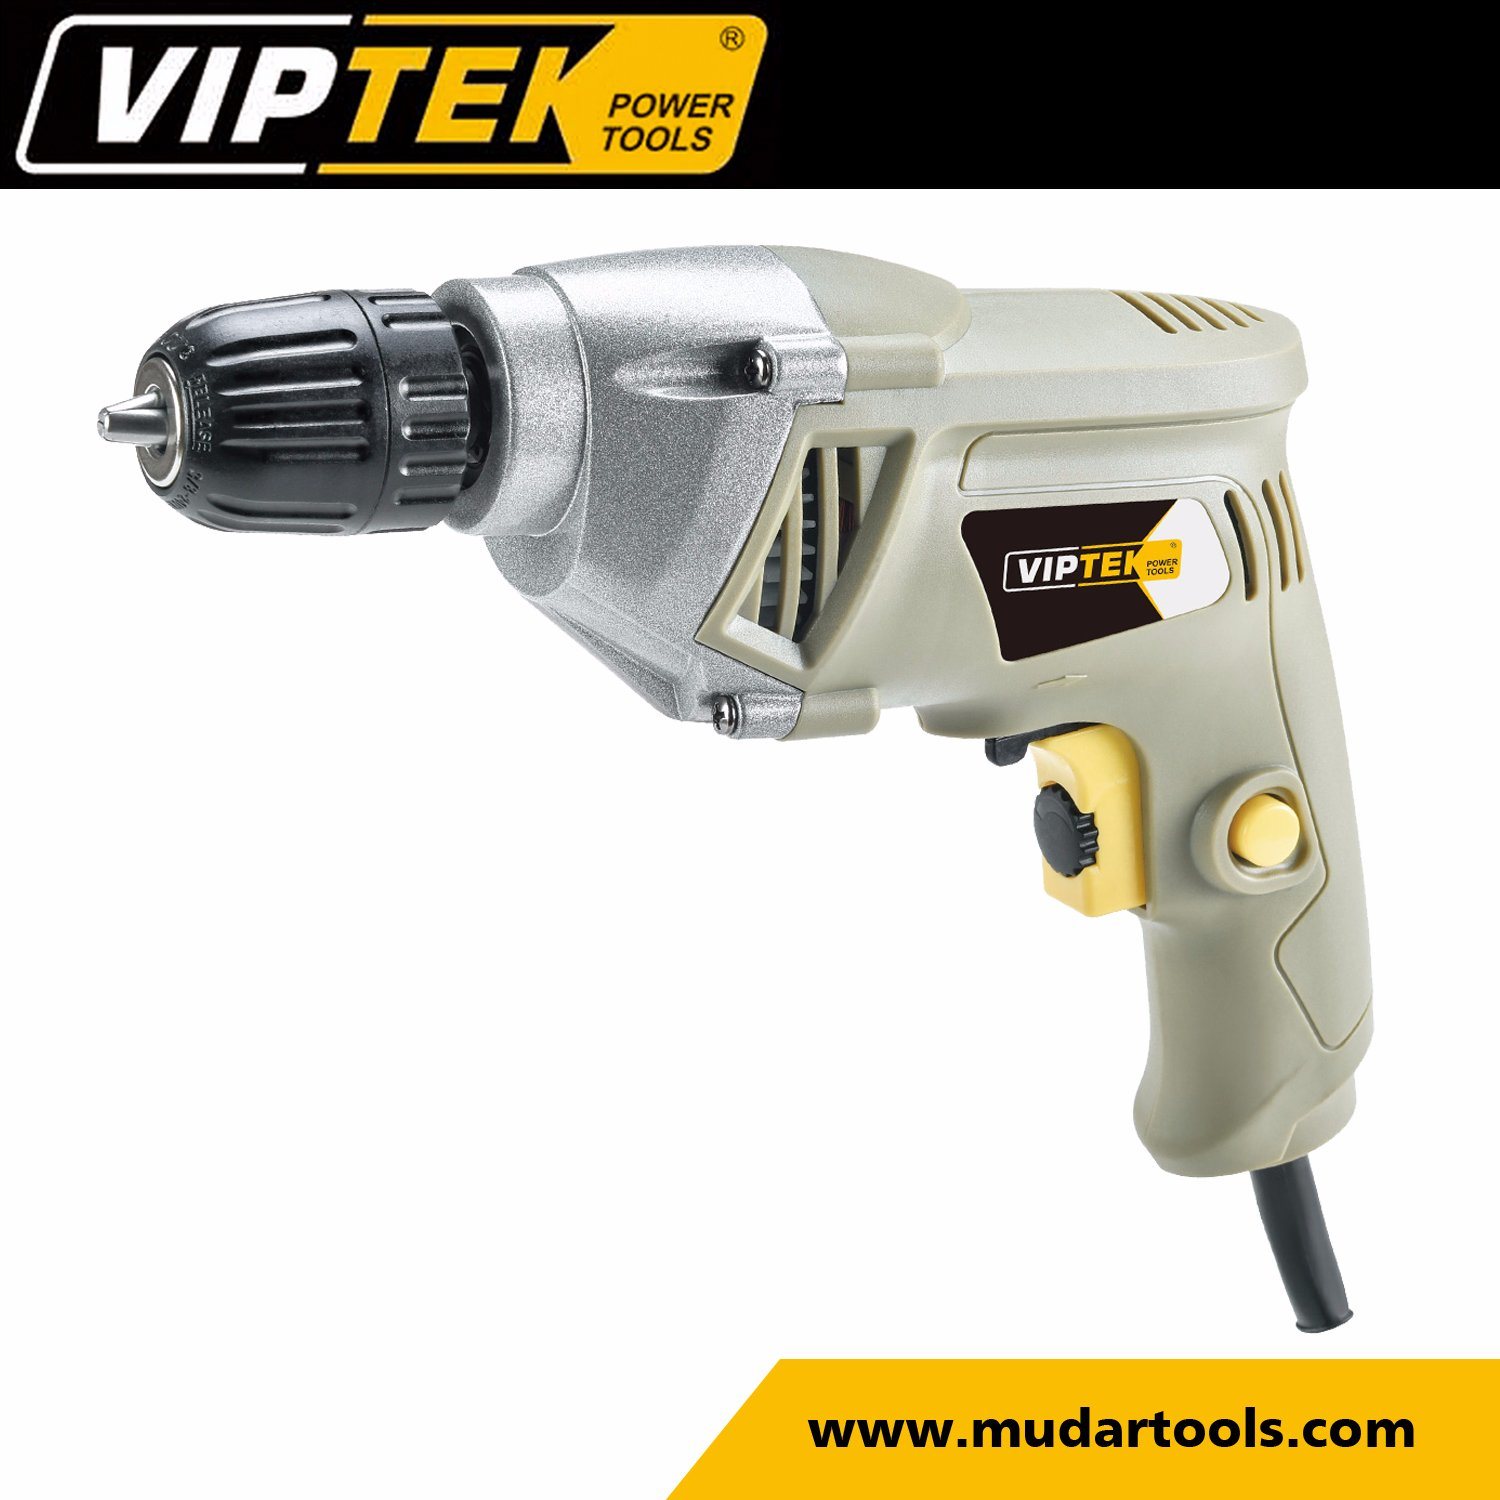 650W Classic Model Variable Speed Electric Impact Drill